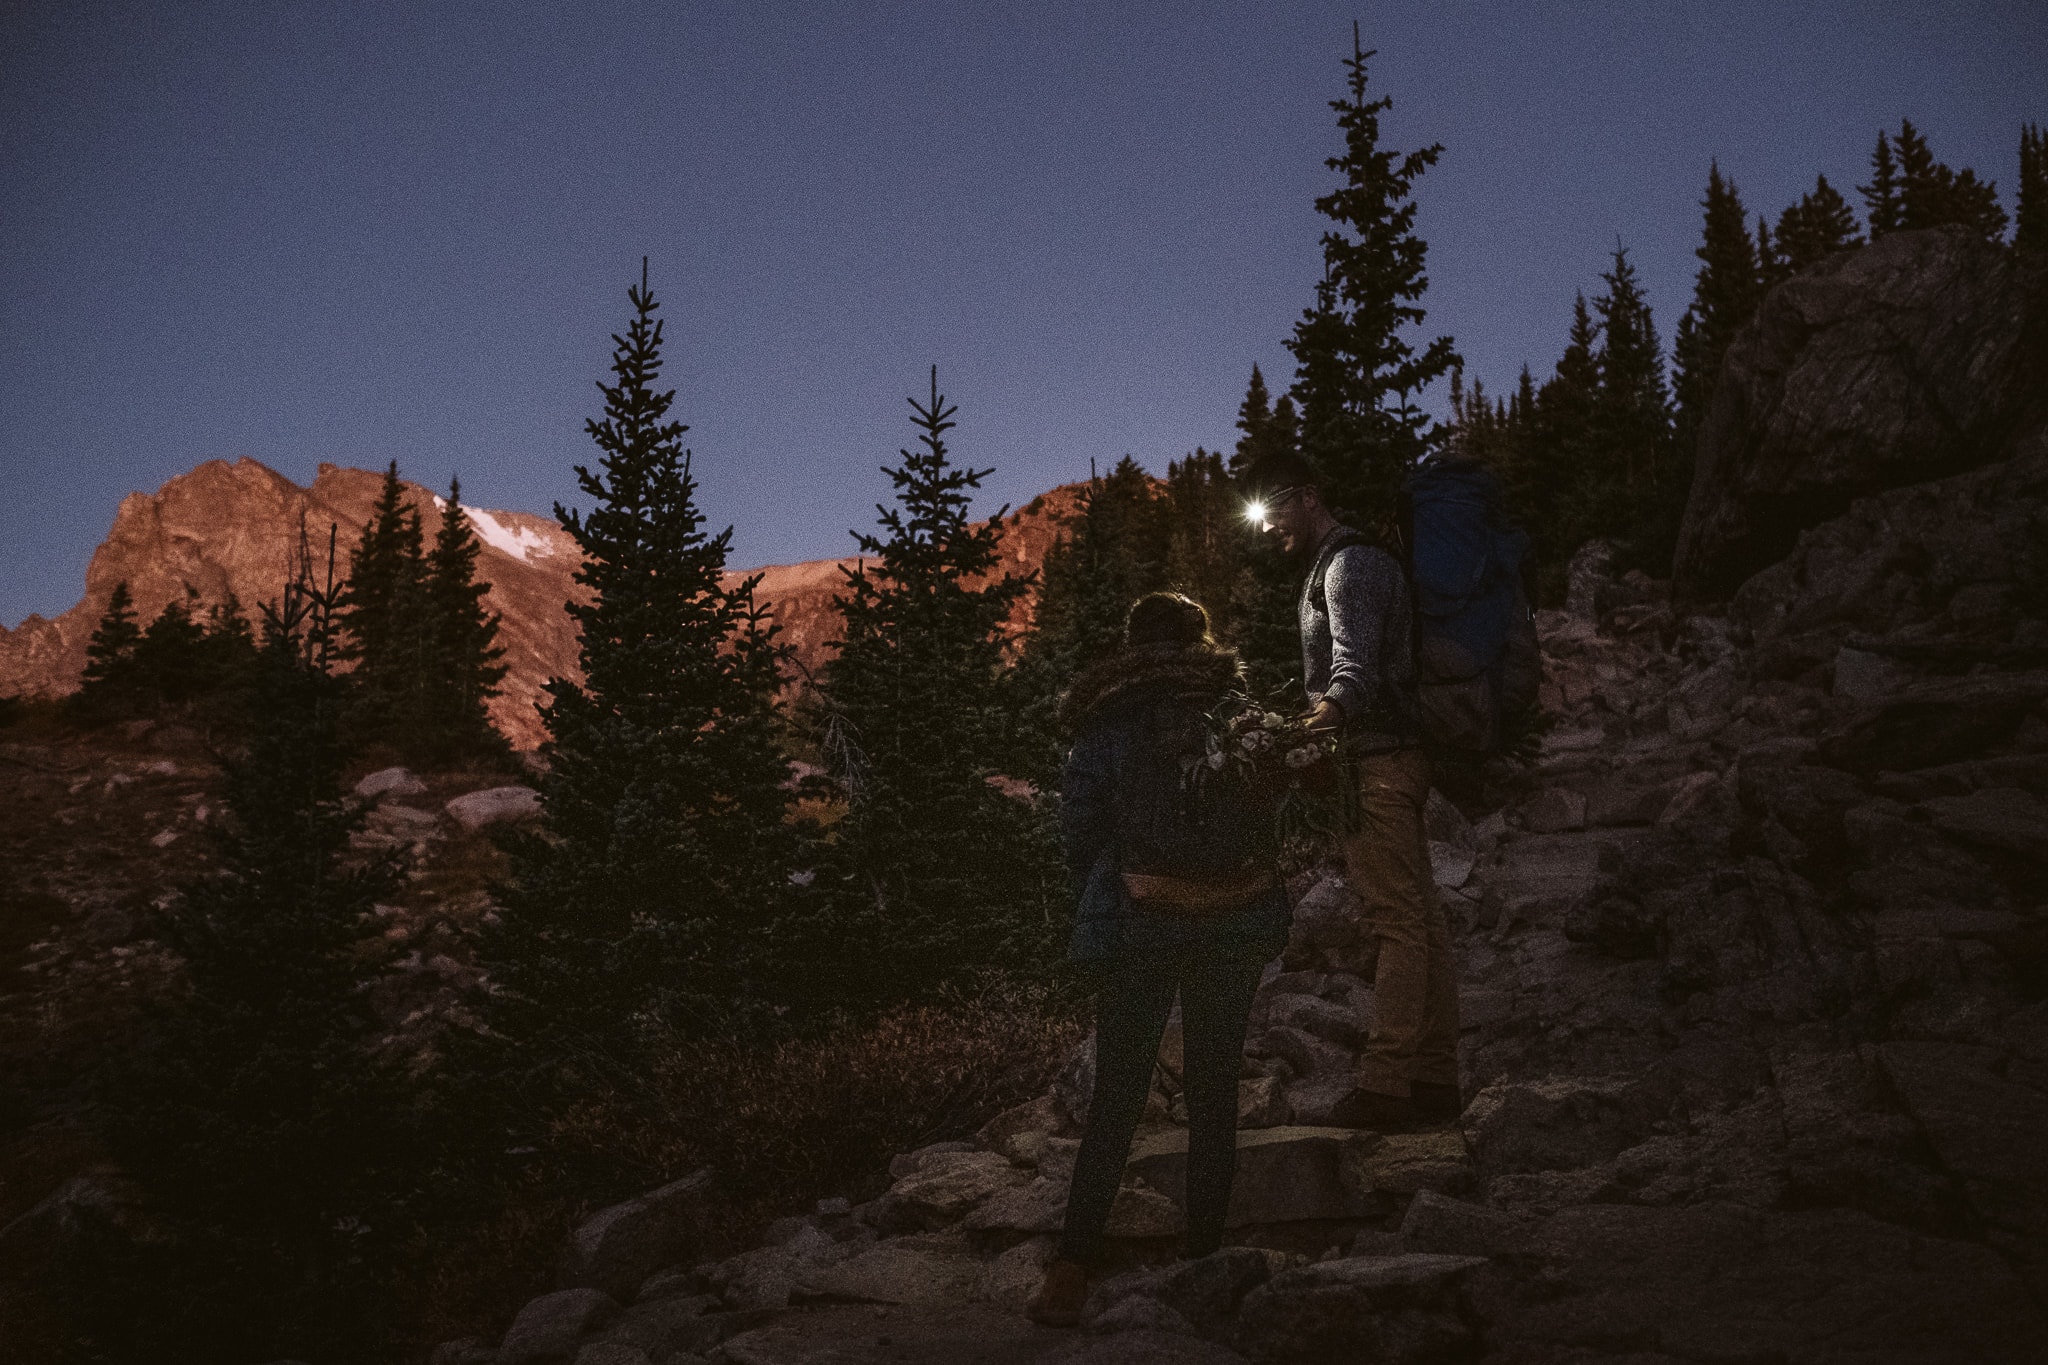 Couple hiking by headlamps